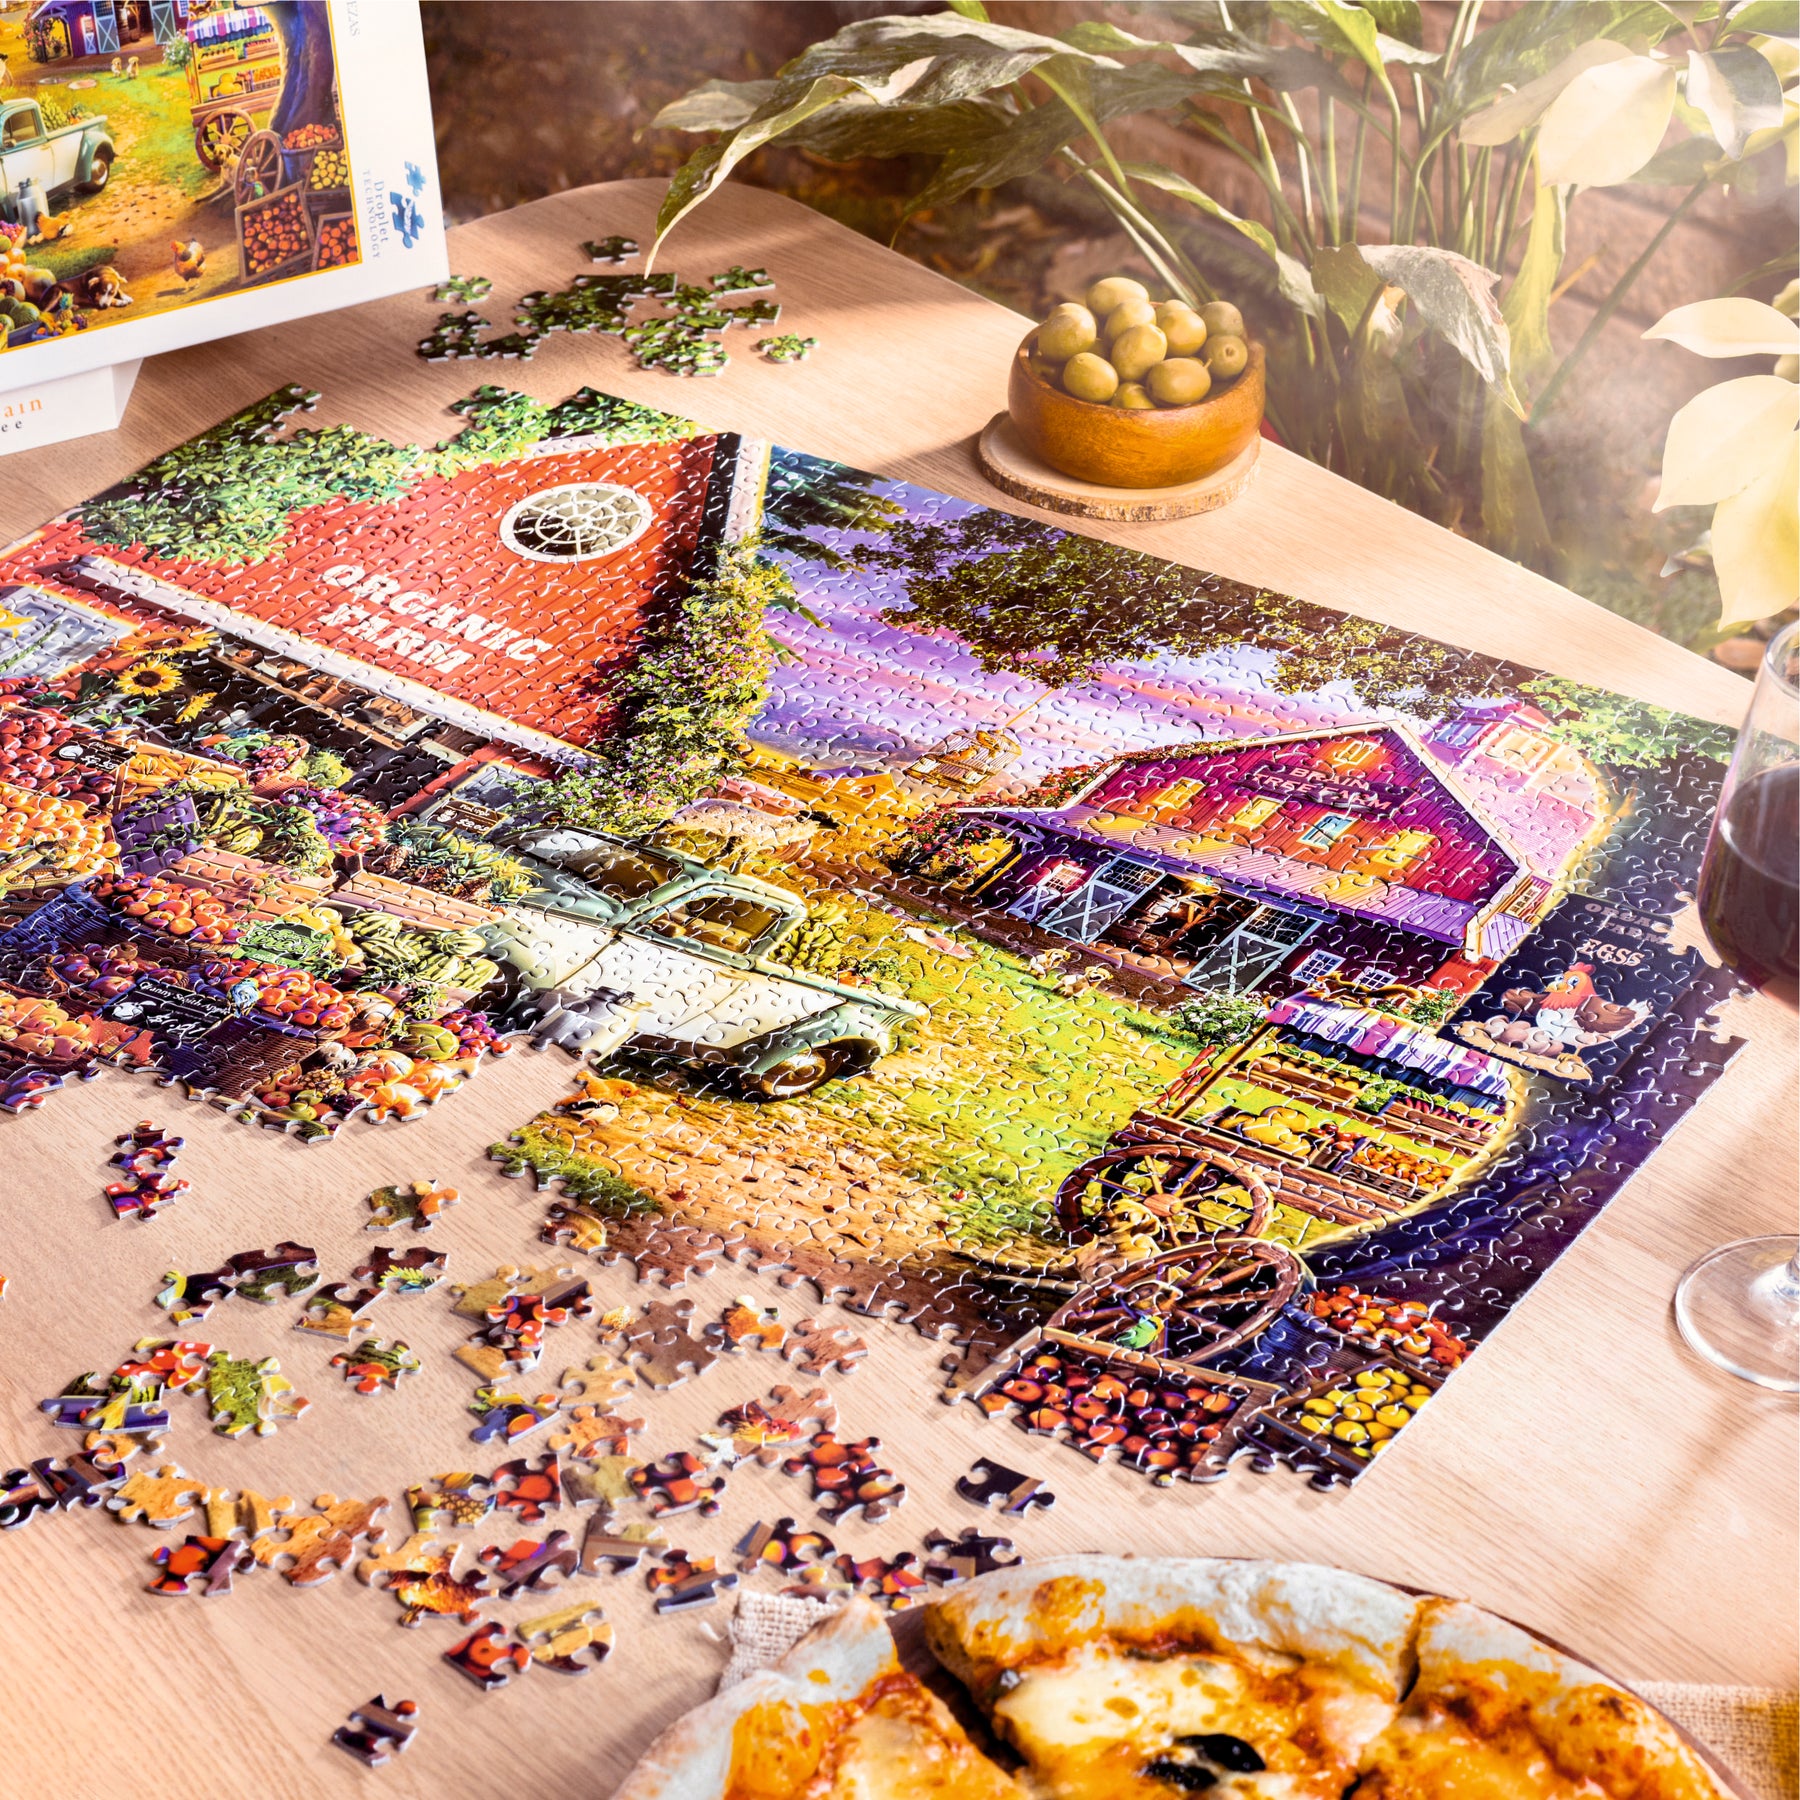 Top 11 500 Piece Jigsaw Puzzles Under $13 In 2022